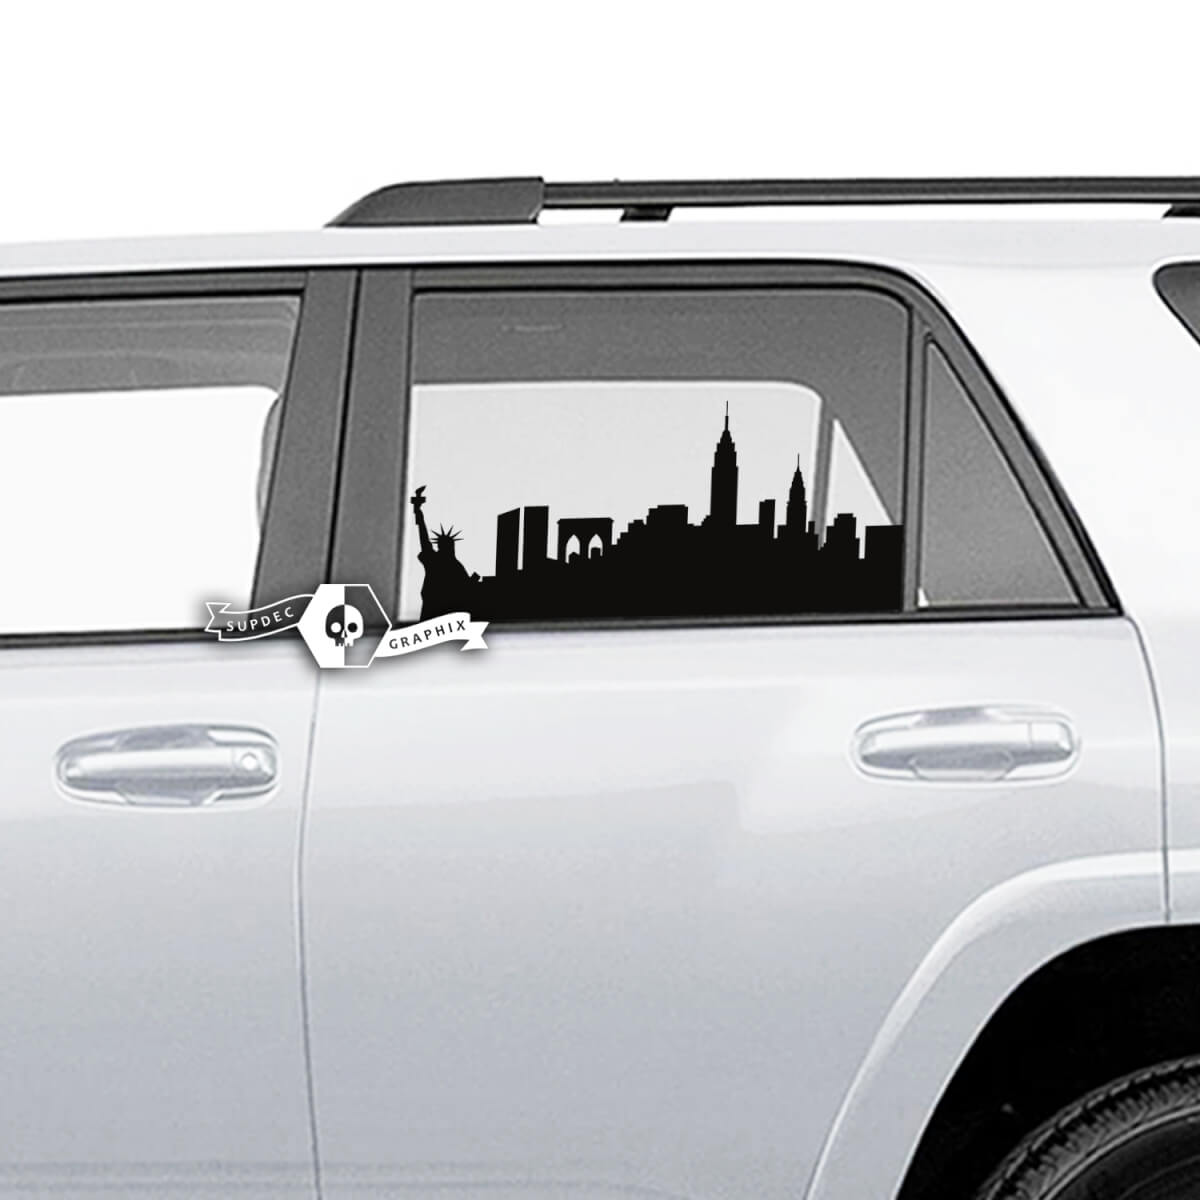 Pair of 4Runner  Window Statue of Liberty Side Vinyl Decals Stickers for Toyota 4Runner
